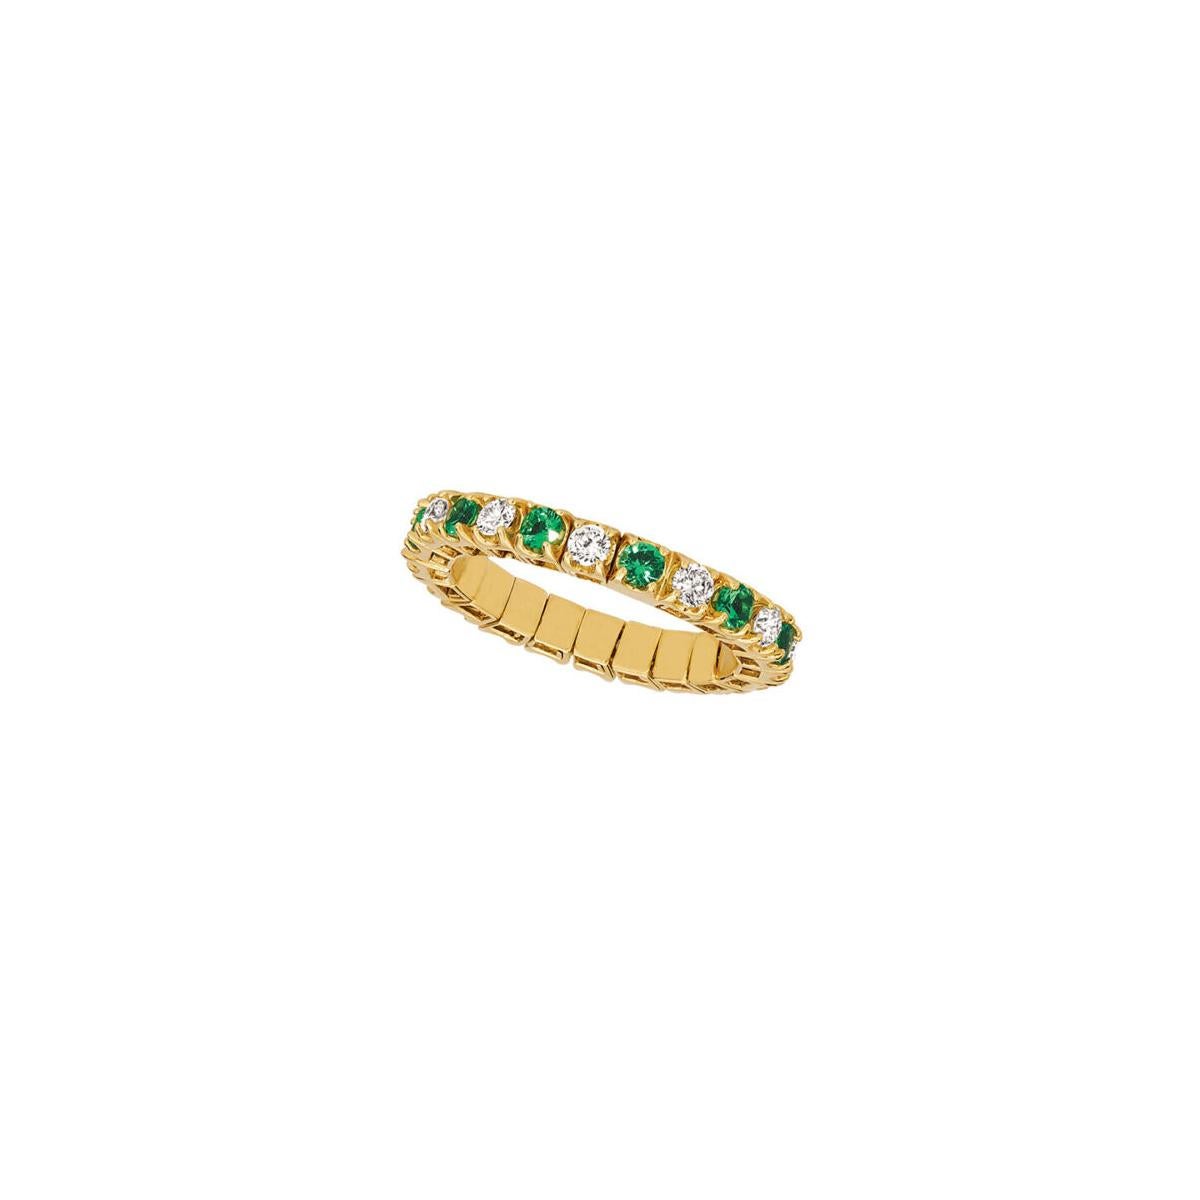 100% Natural Diamonds and Emeralds, Not Enhanced in any way
1.55CT 
G-H 
SI  
14K Yellow Gold, Prong Pave Style, 3.4 gram
1/8 inch in width
Size 7 (Stretchable)
11 diamonds - 0.77ct, 11 emeralds - 0.78ct

RT80-1.5YDE
ALL OUR ITEMS ARE AVAILABLE TO